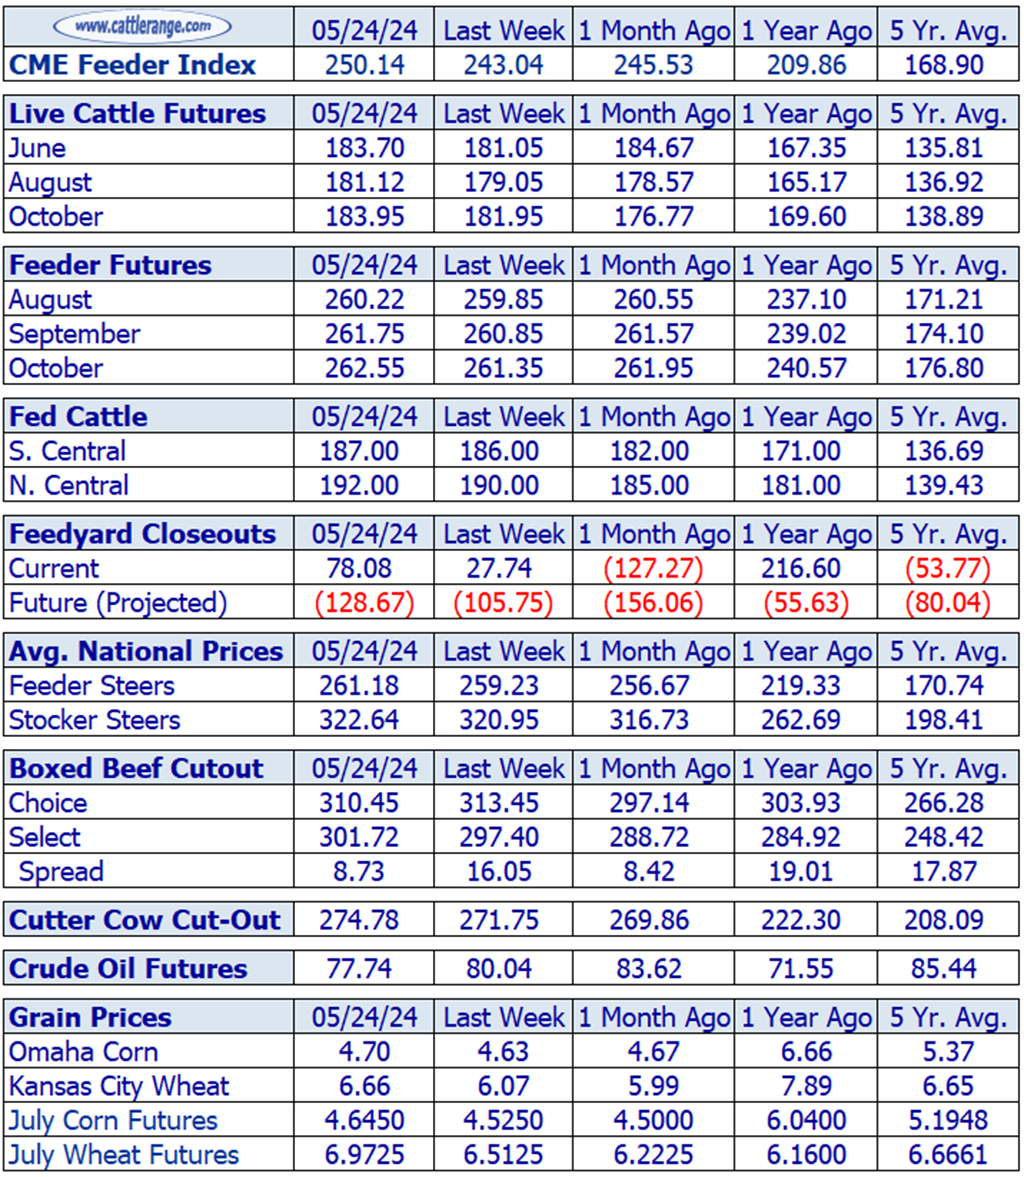 Weekly Cattle Market Overview for Week Ending 5/24/24